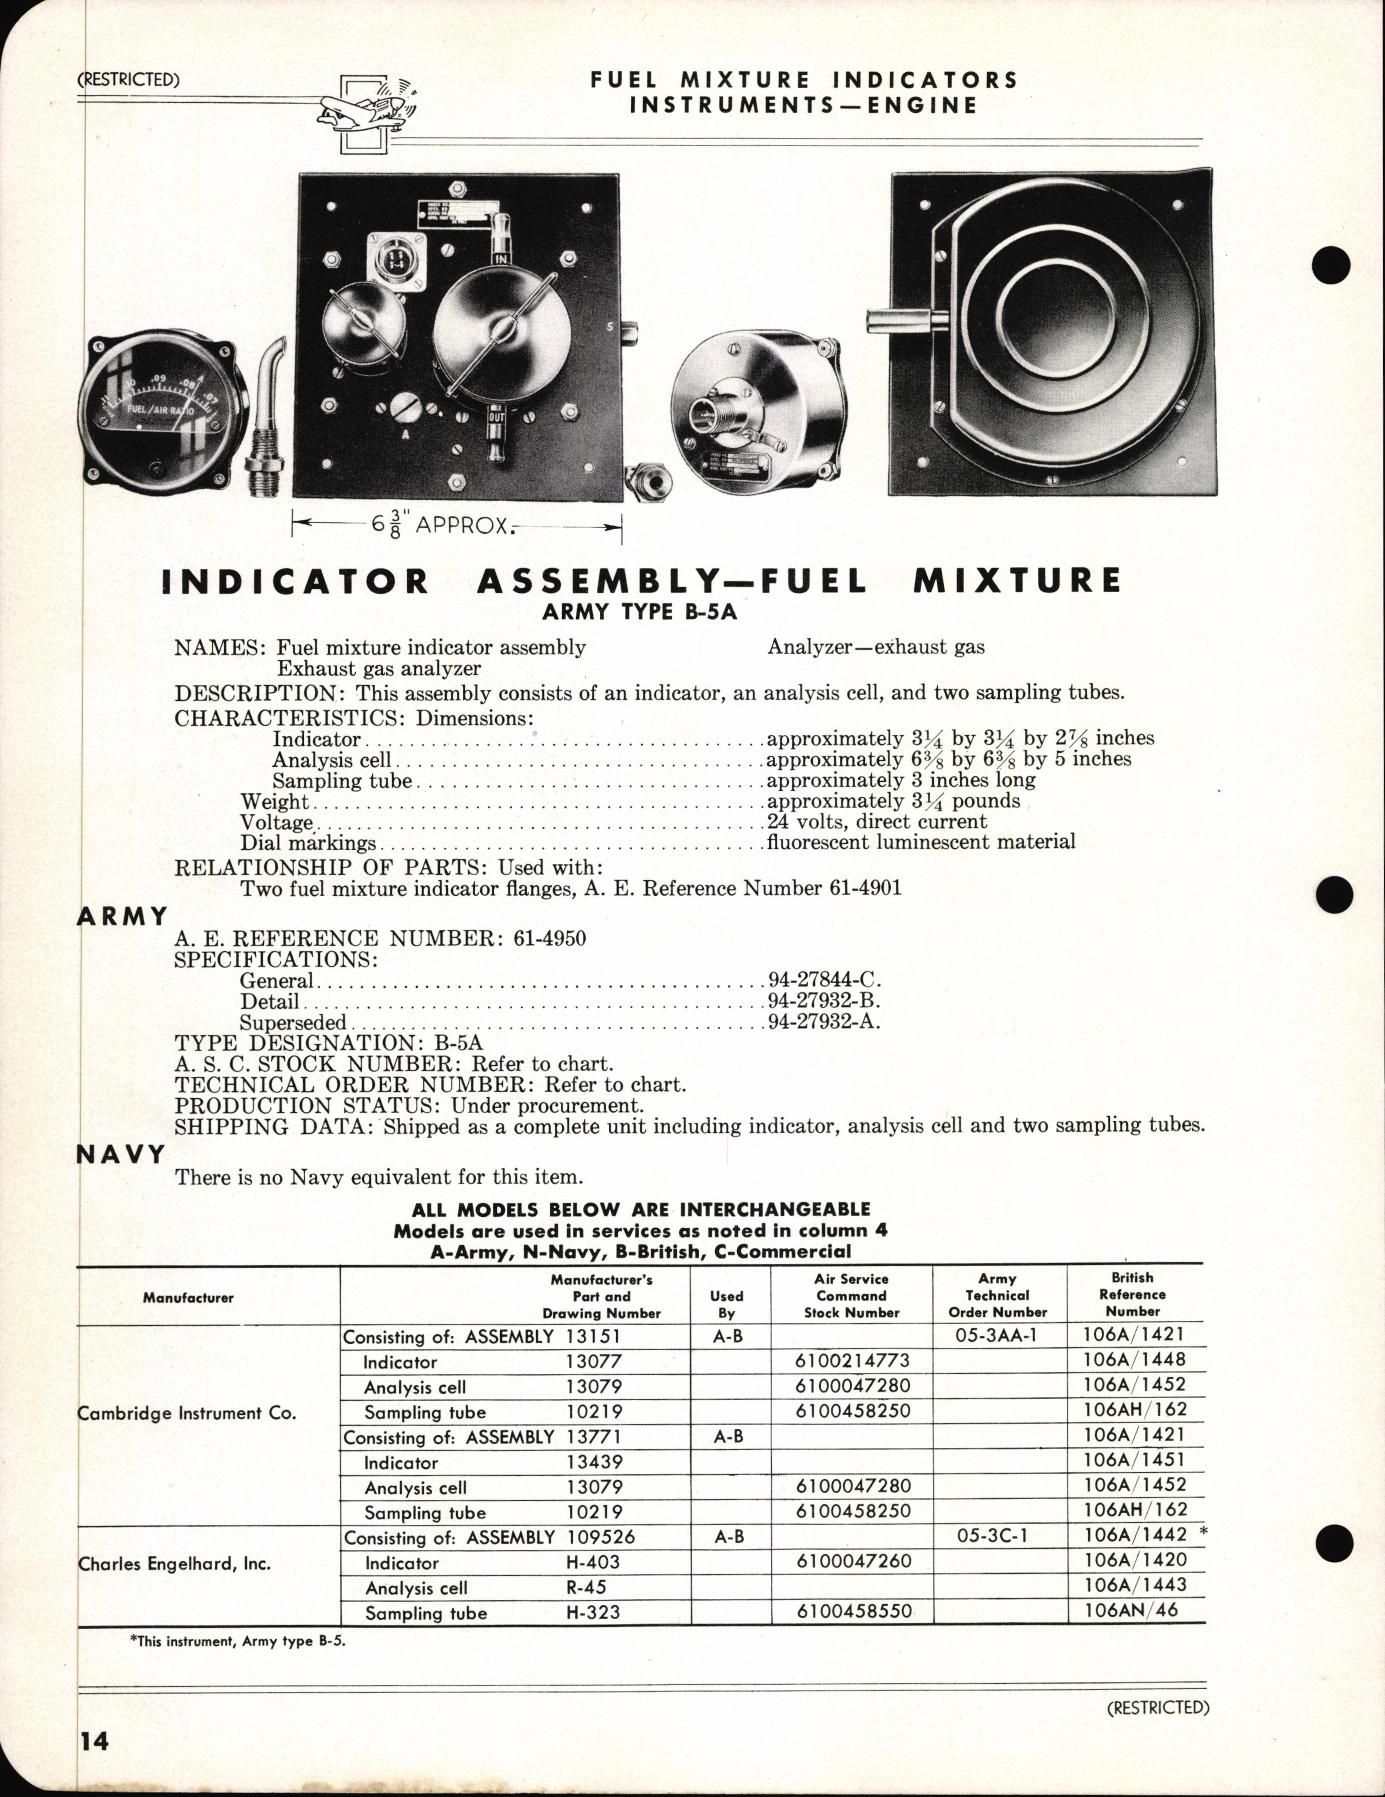 Sample page  109 from AirCorps Library document: Instruments - Index of Aeronautical Equipment - Volume 6